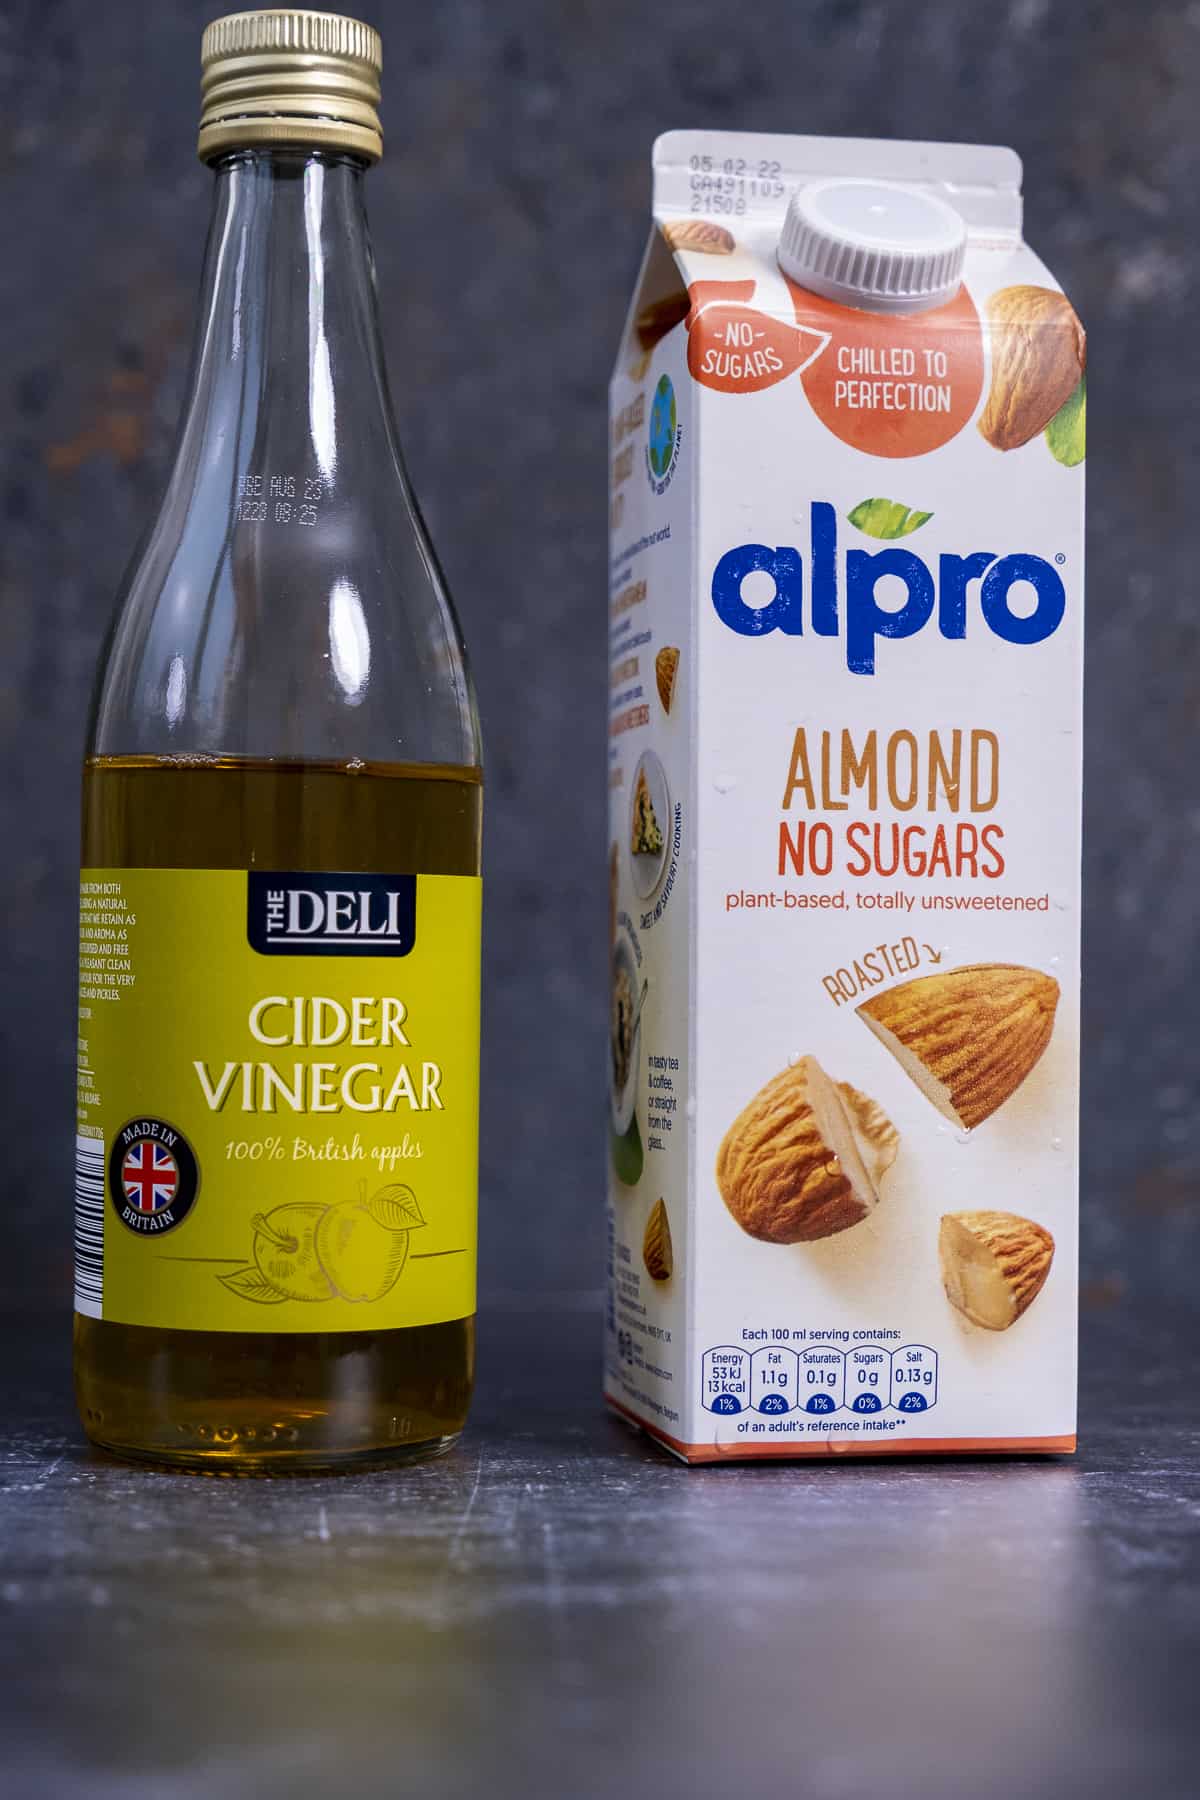 A carton of Alpro almond milk and a bottle of apple cider vinegar on a dark background.